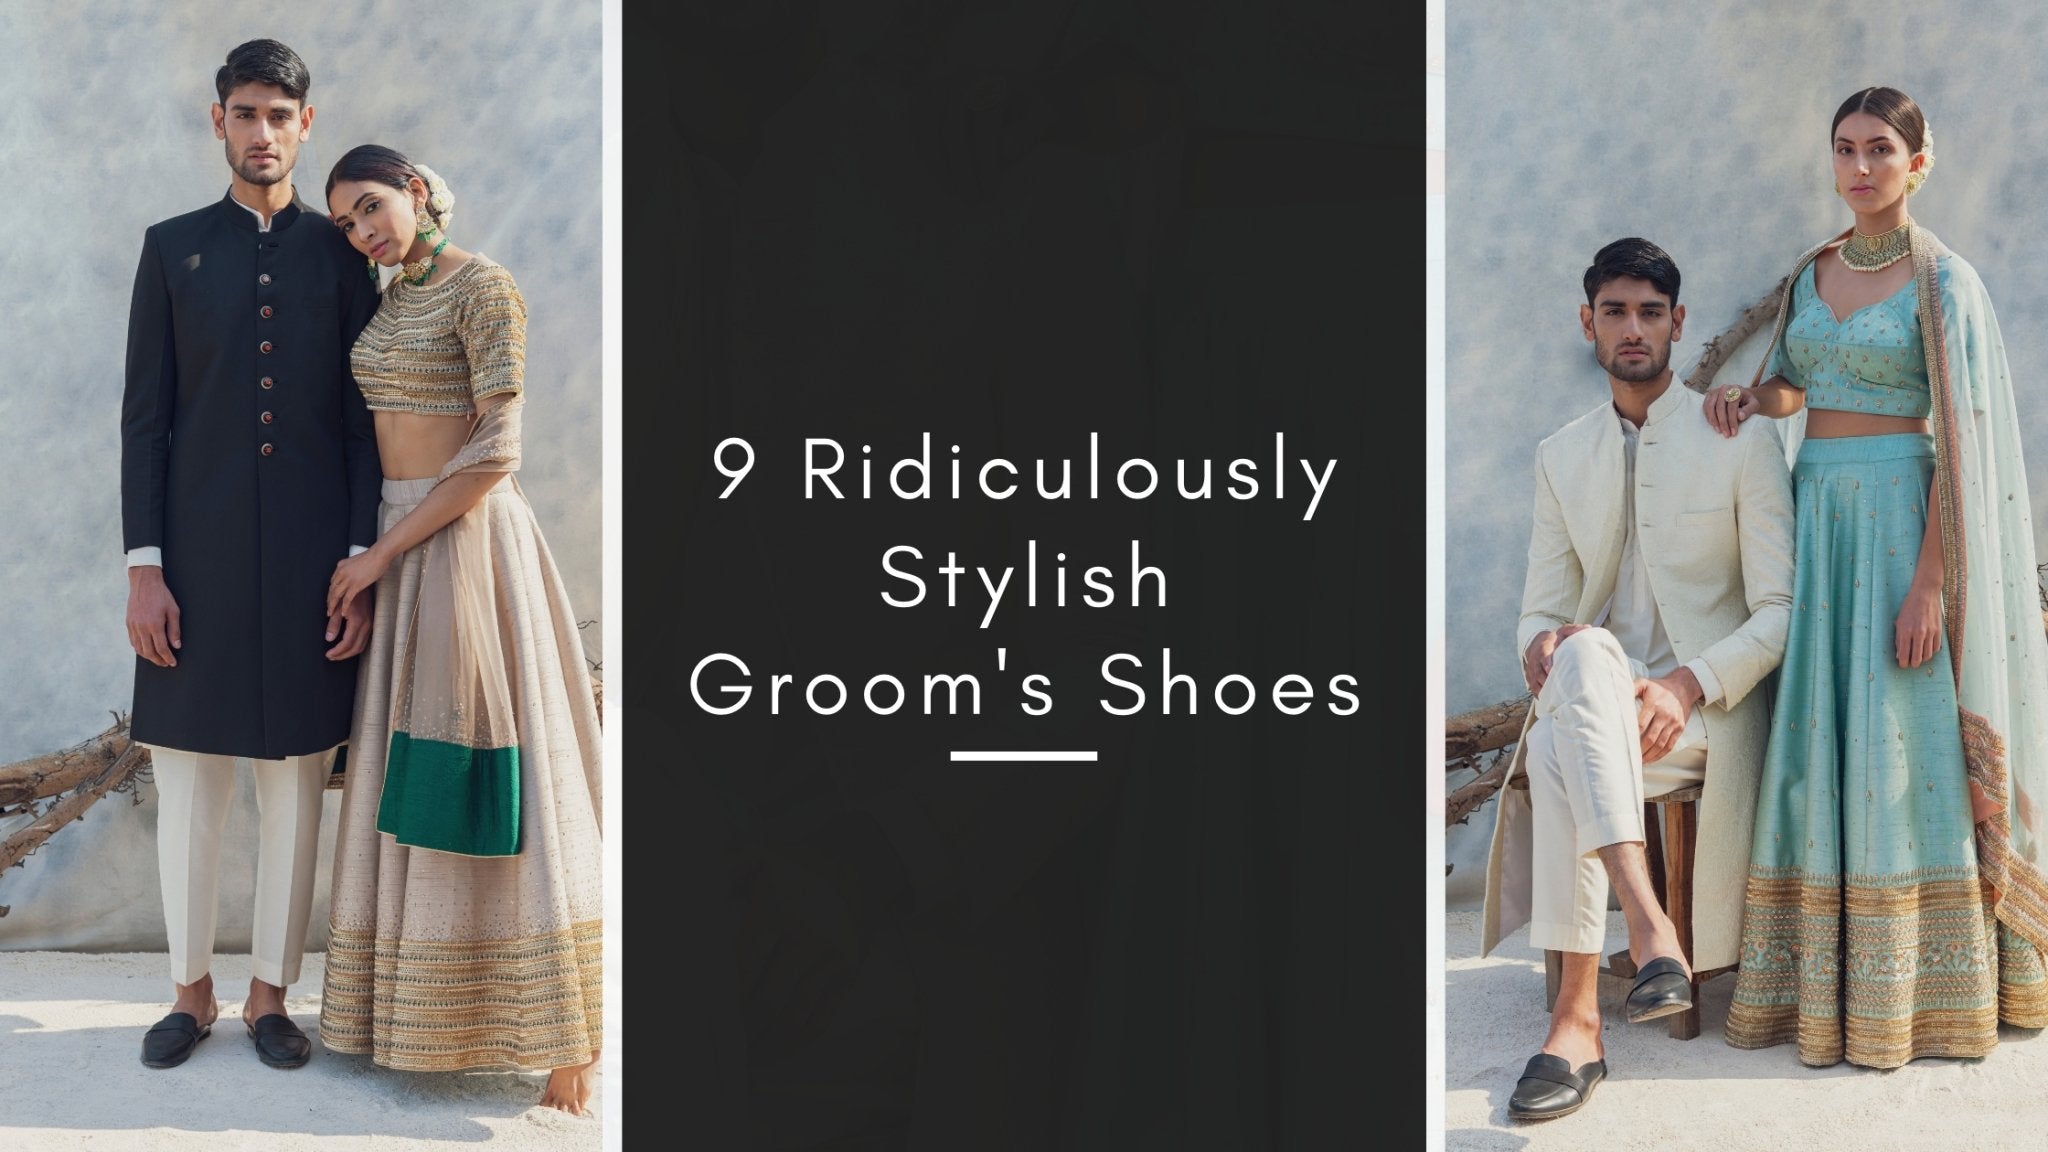 9 Ridiculously Stylish Groom's Shoes - dmodot Shoes